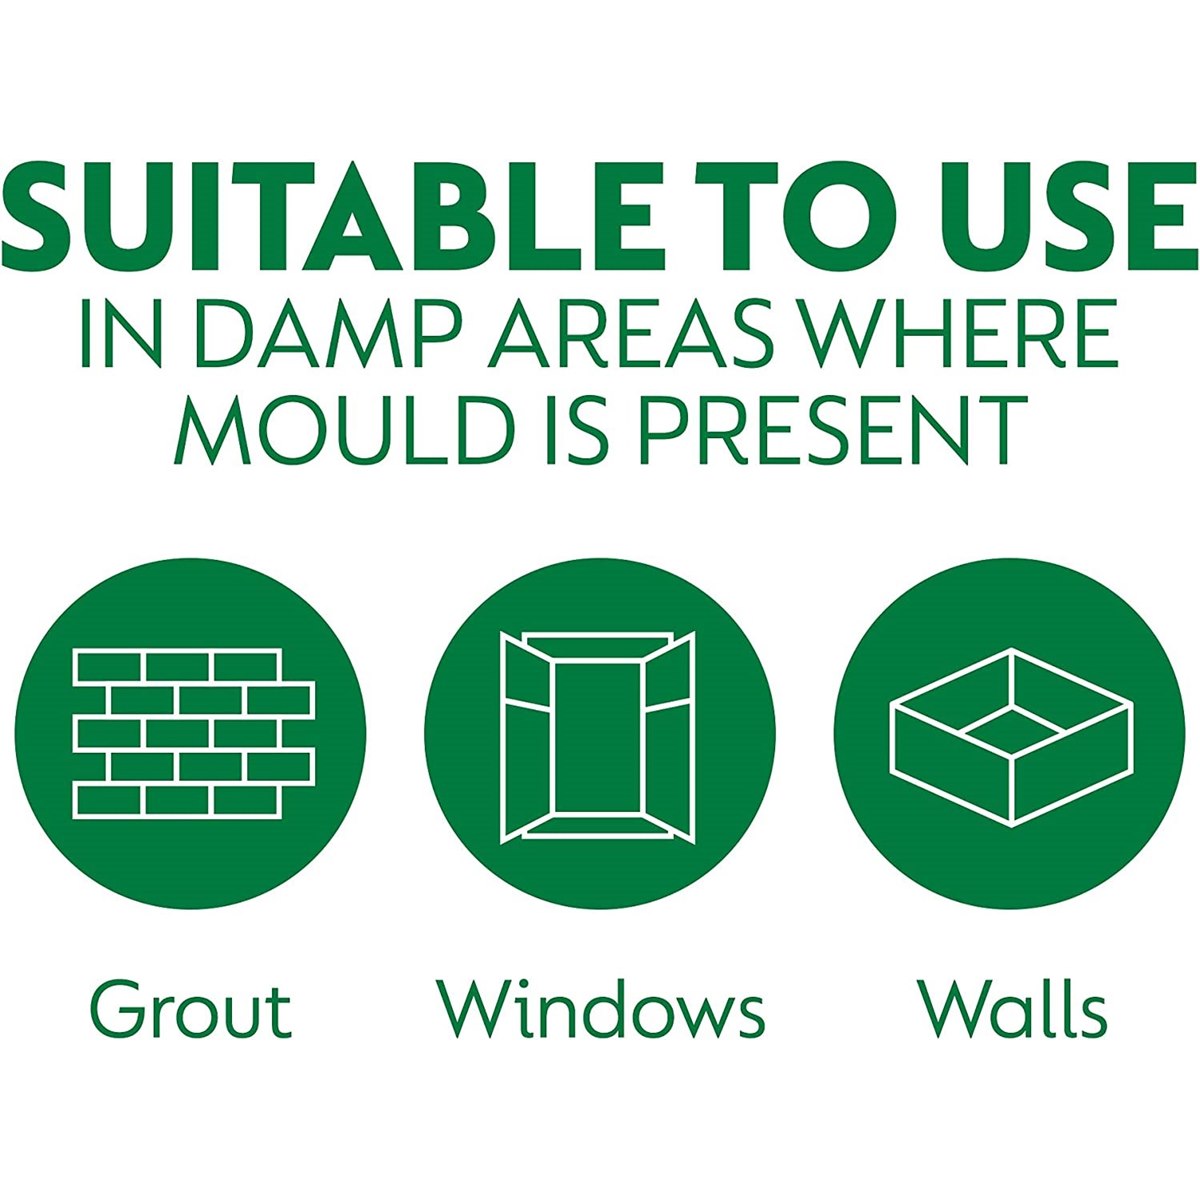 How to Remove Mould from Walls and Windows